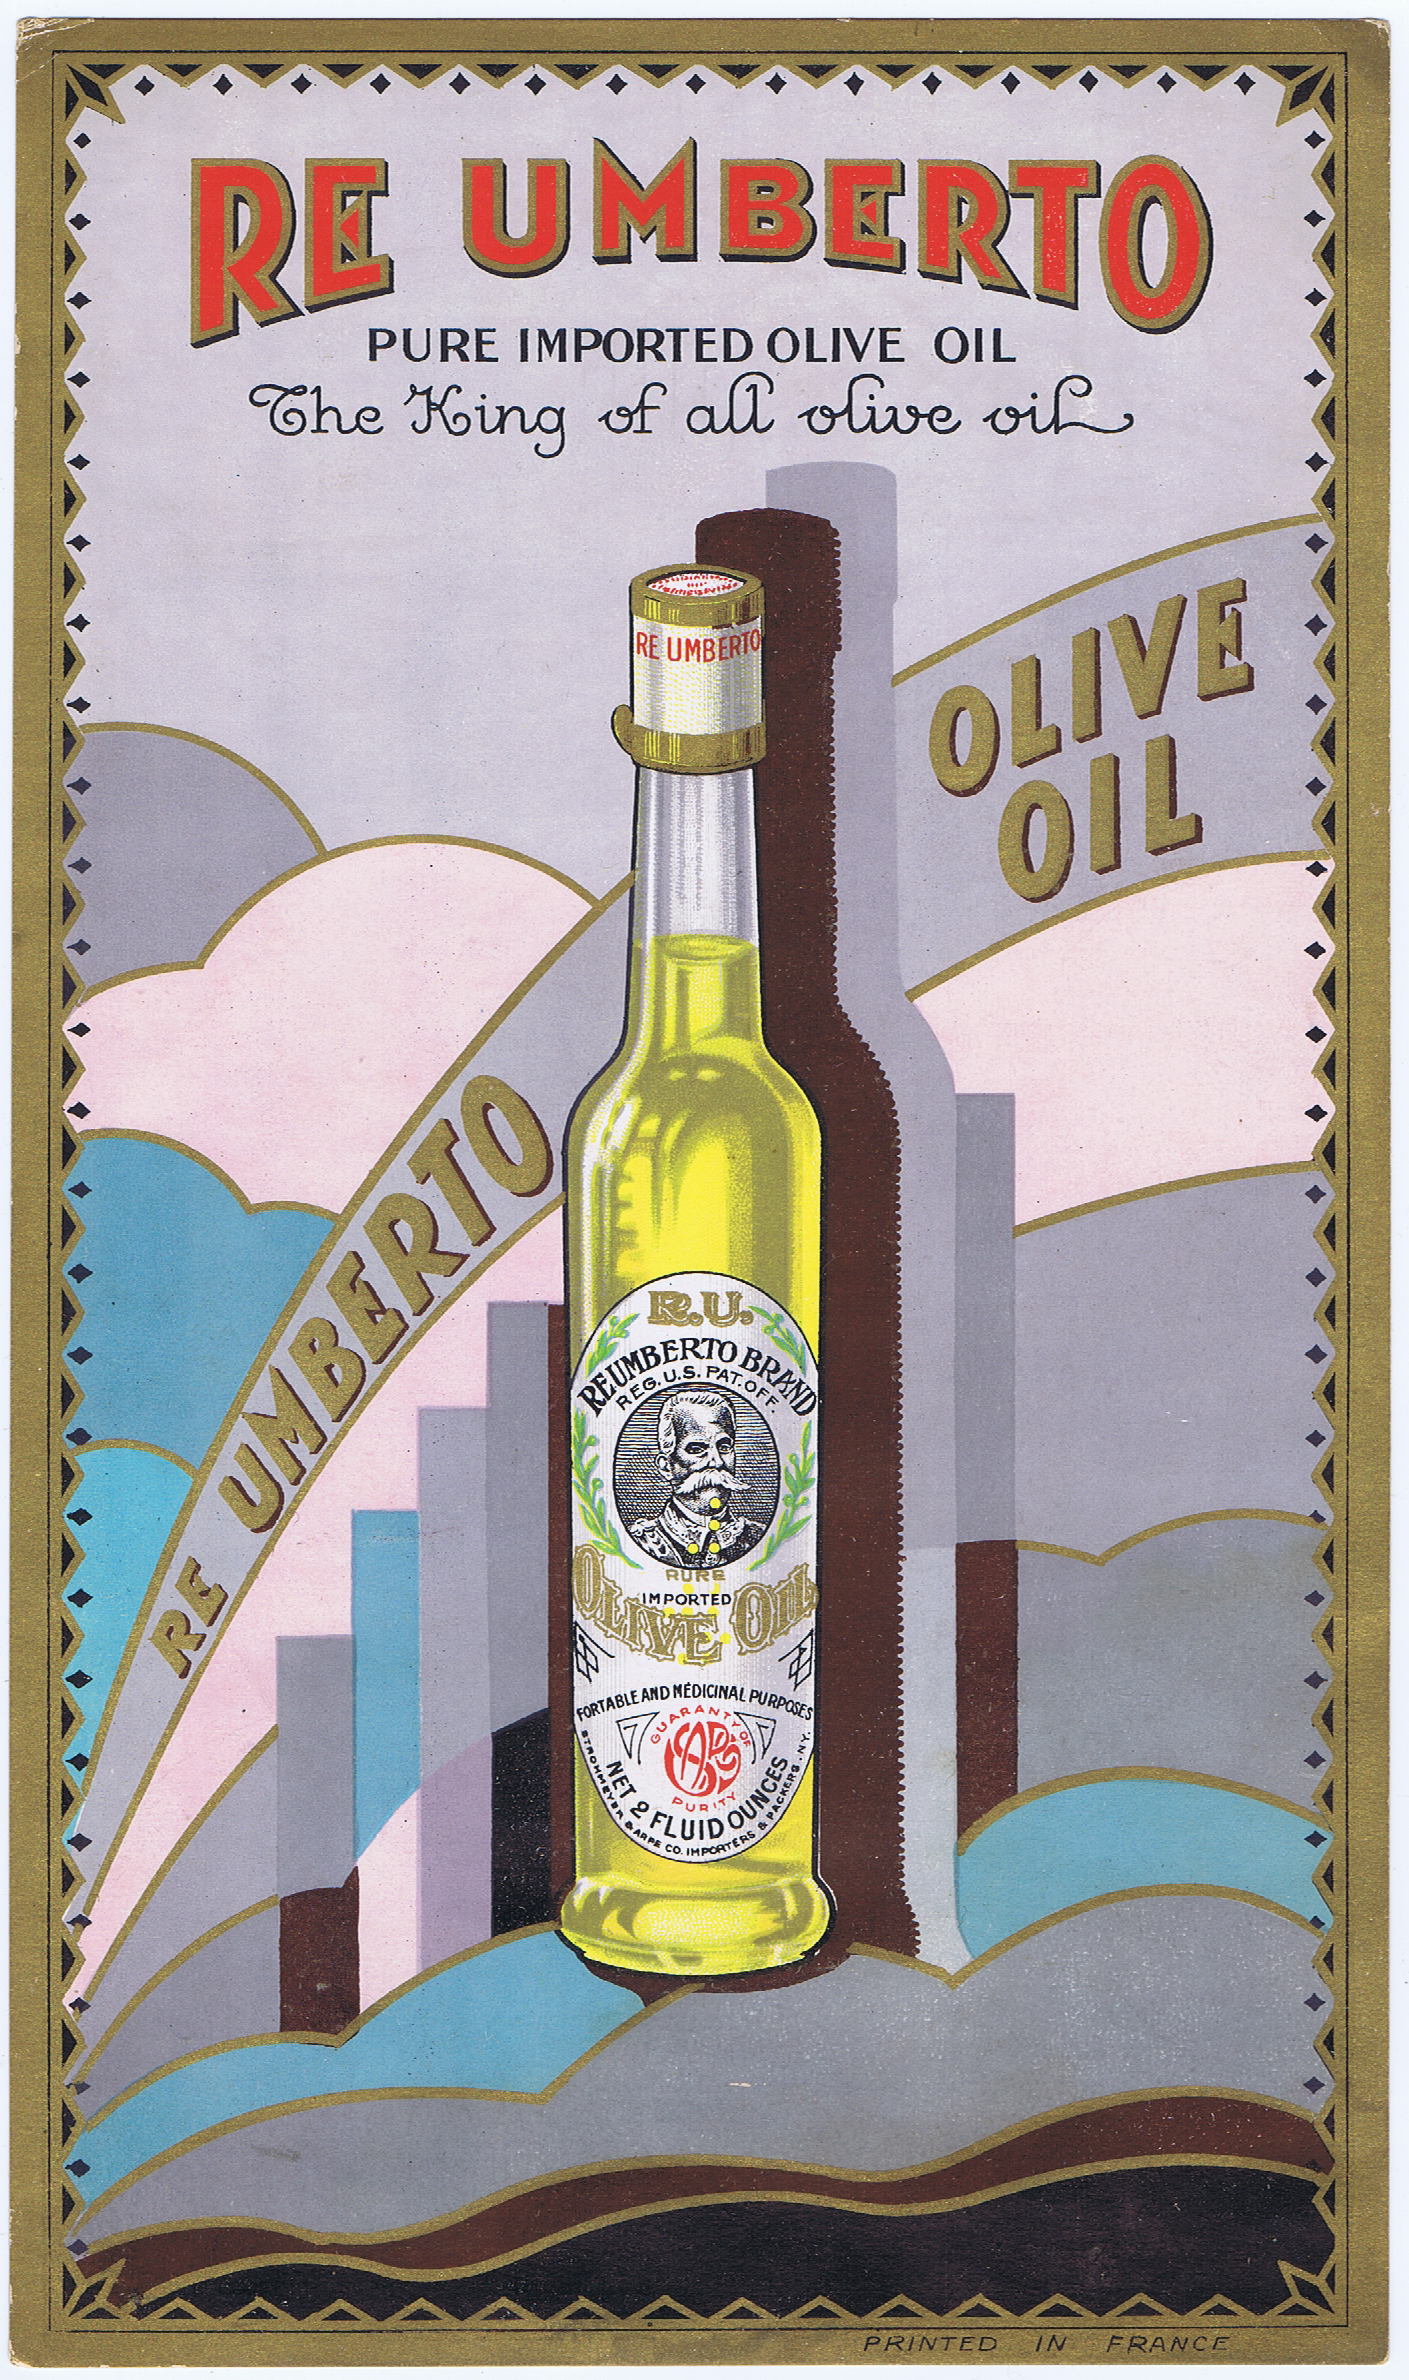 L0293	RE UMBERTO - KING OF ALL OLIVE OIL